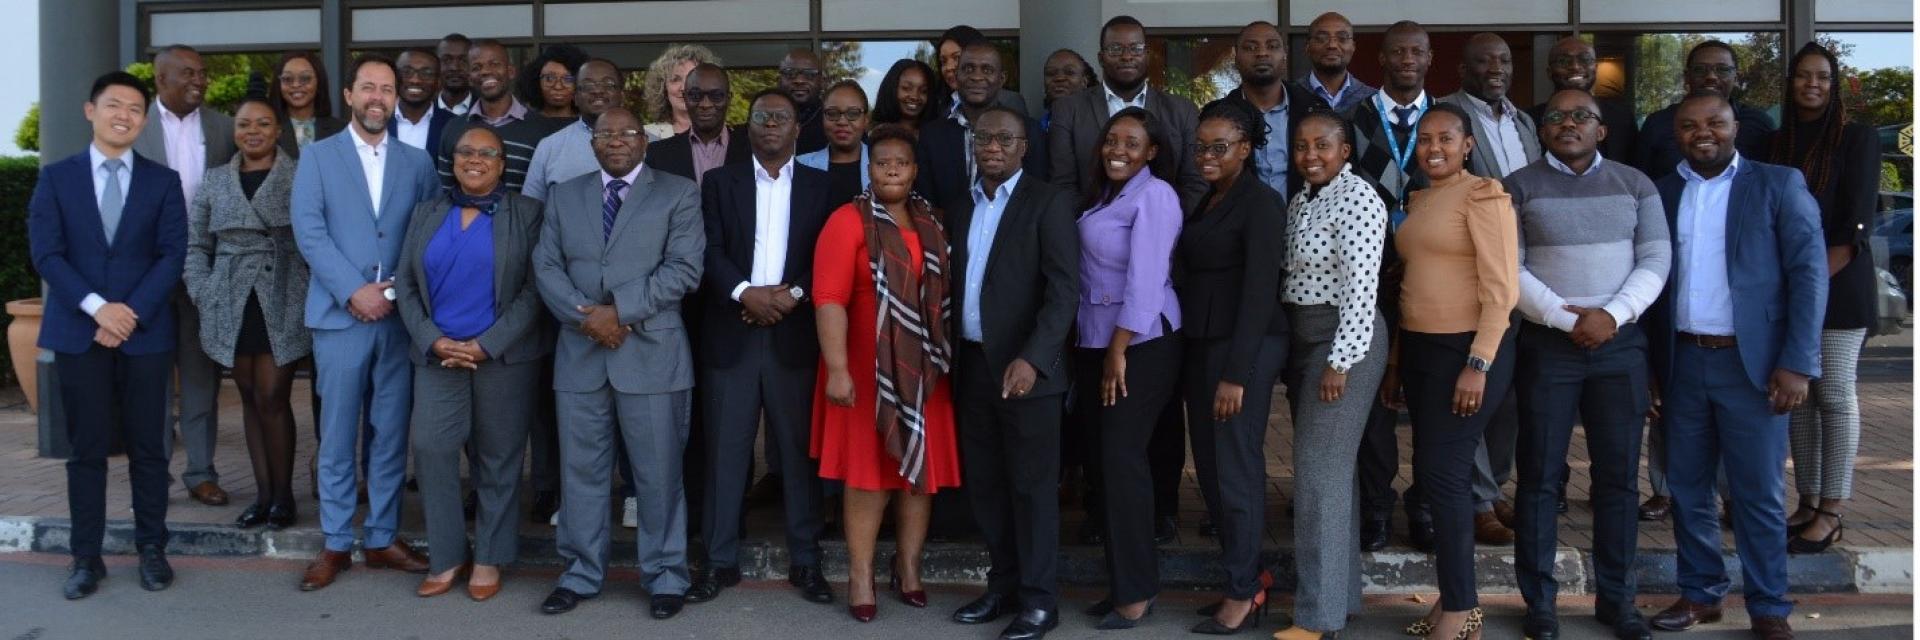 Bank of Zambia, Stichting Frontclear Technical Assistance Program and the United Nations Economic Commission for Africa held a workshop for money and interbank market development in Zambia